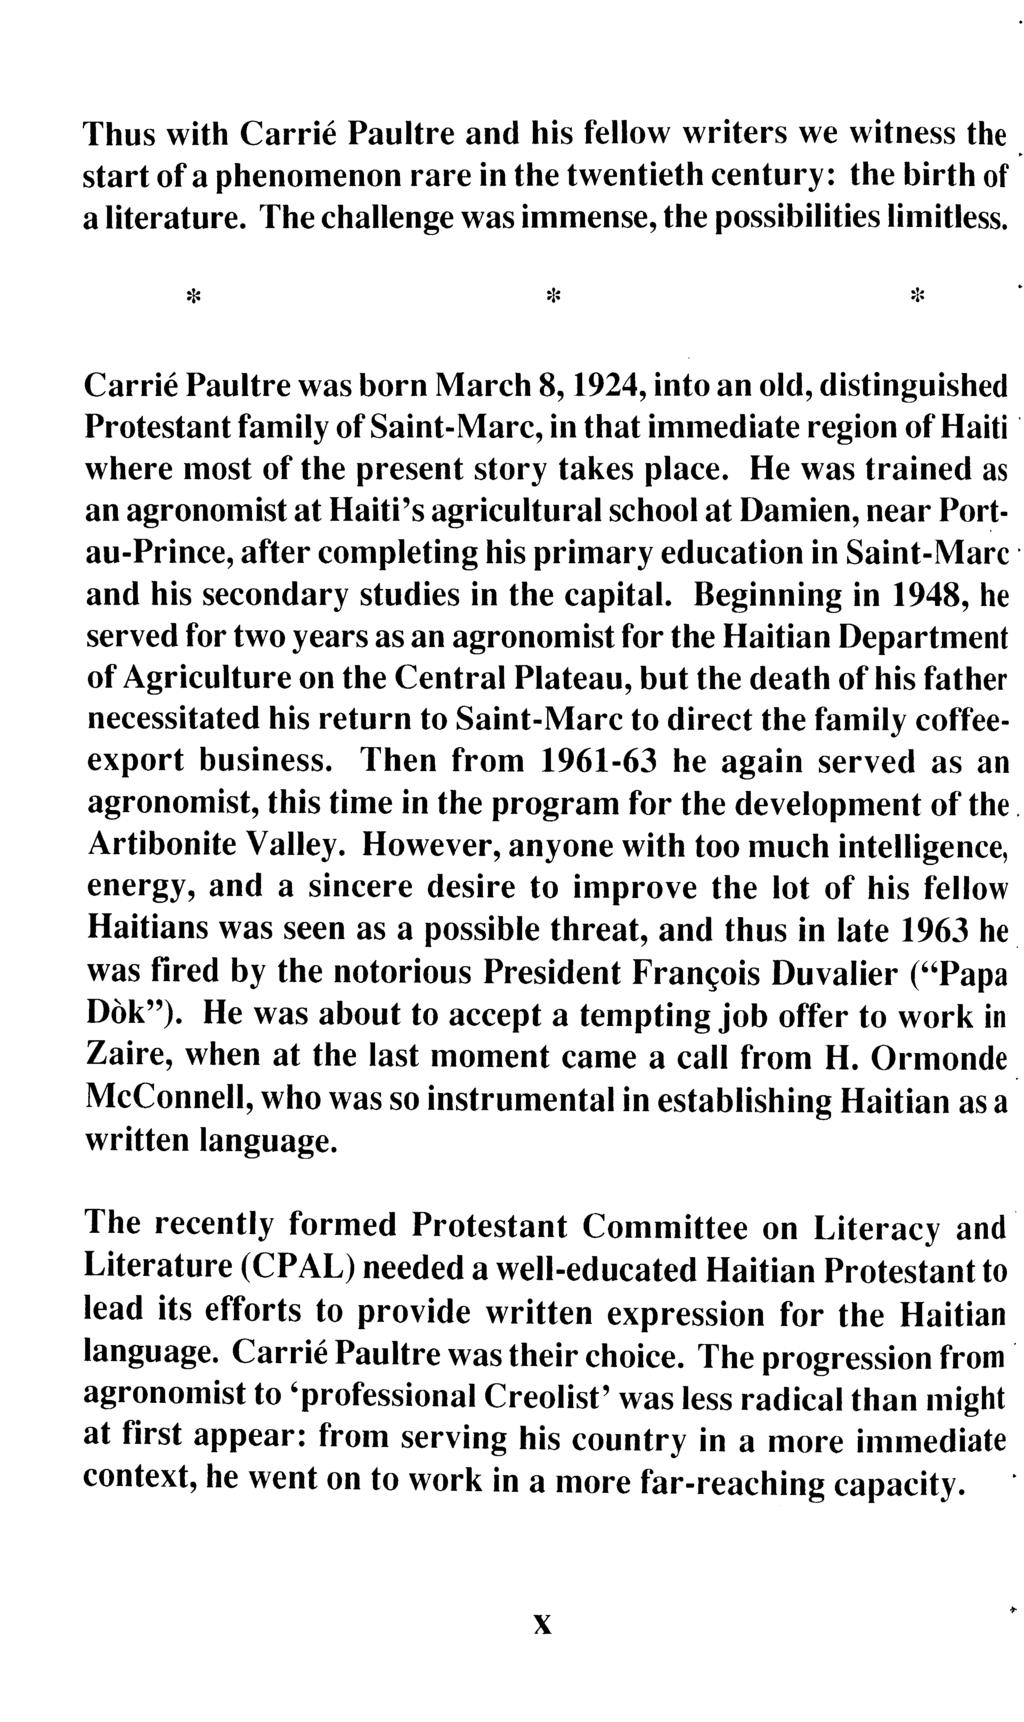 Thus with Carrié Paultre and his fellow writers we witness the start of a phenomenon rare in the twentieth century: the birth of a literature. The challenge was immense, the possibilities limitless.